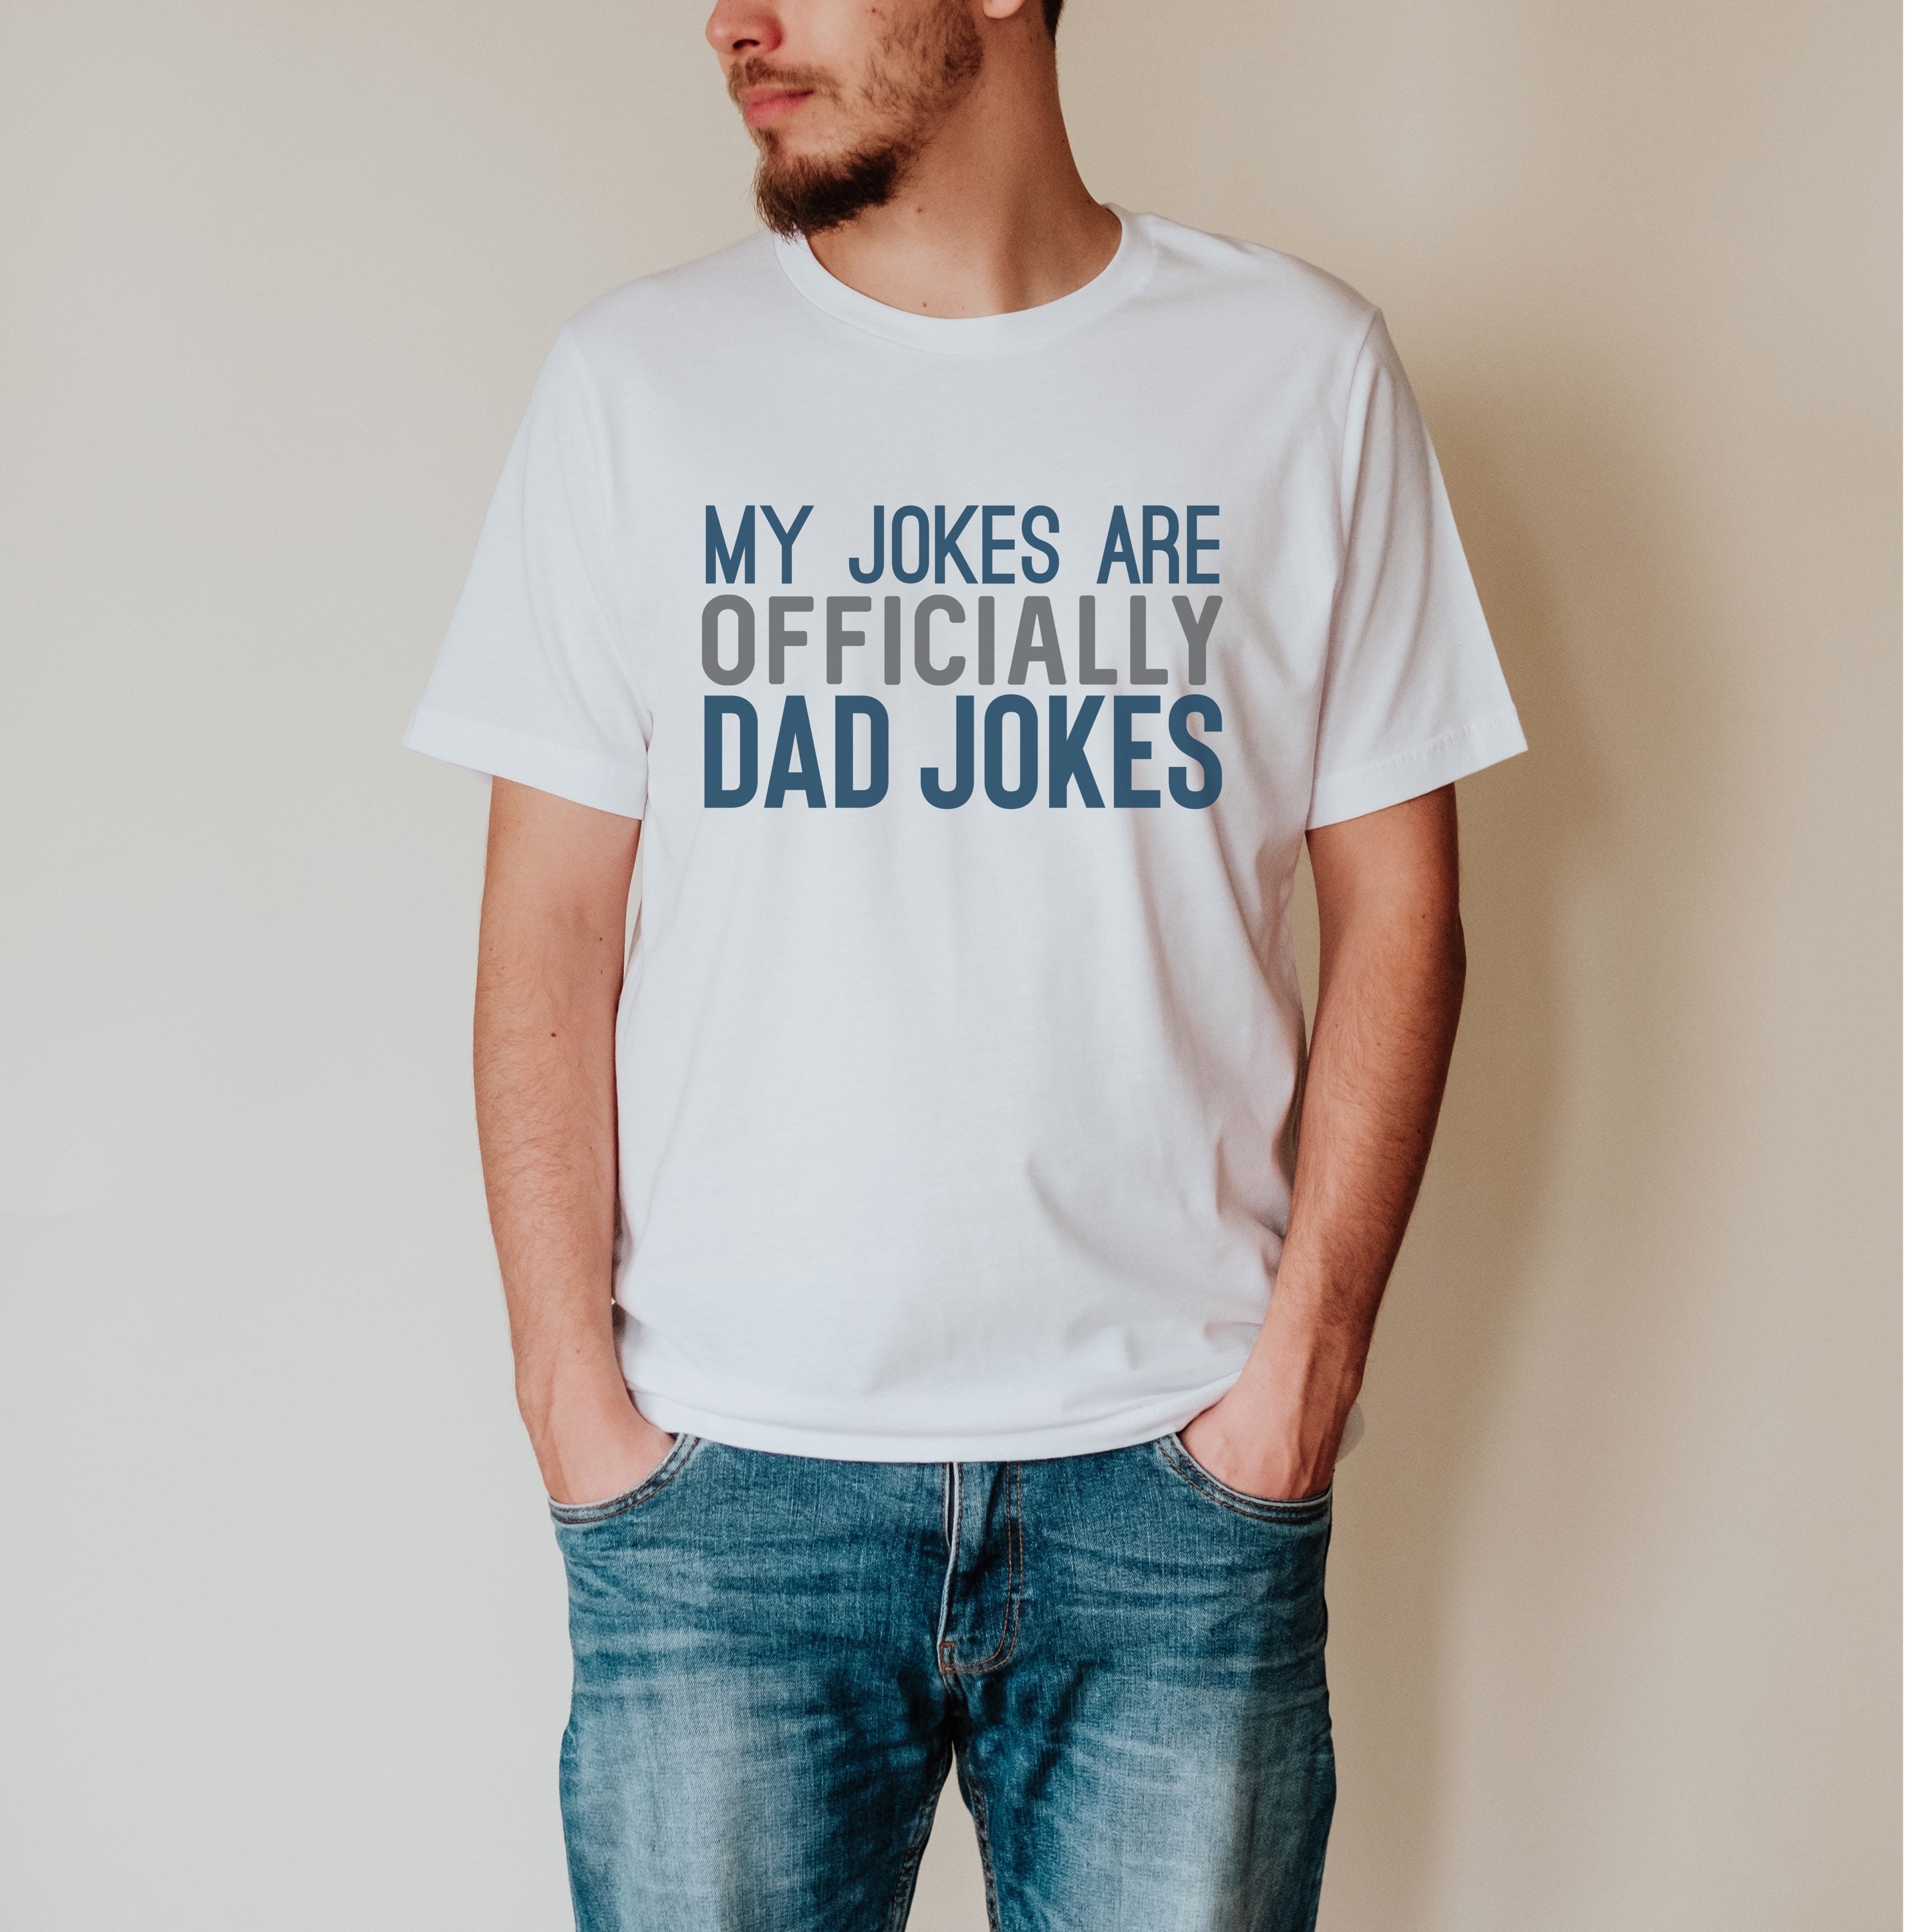 My Jokes Are Officially Dad Jokes Tee Shirt Gift For Father | My XXX ...